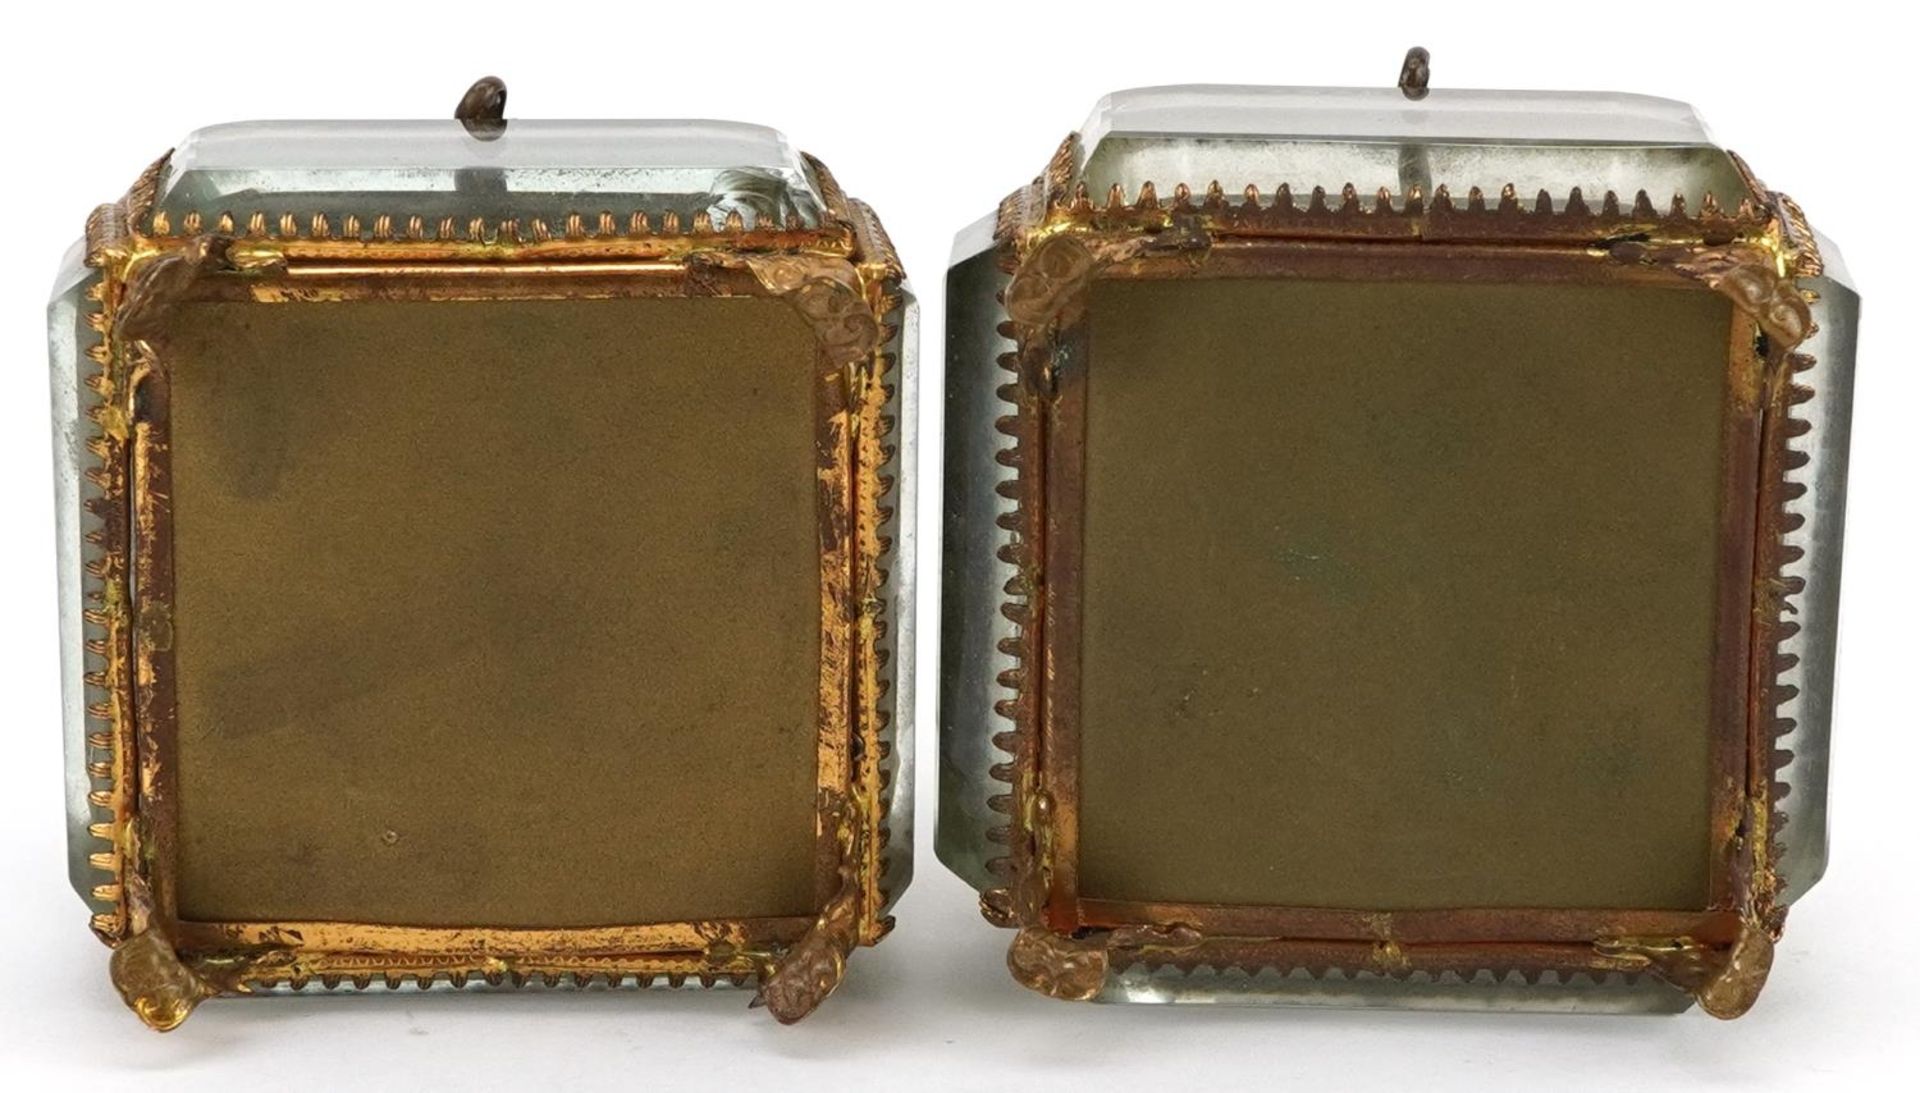 Pair of 19th century Grand Tour jewel caskets with bevelled glass panels and silk button back - Image 4 of 4